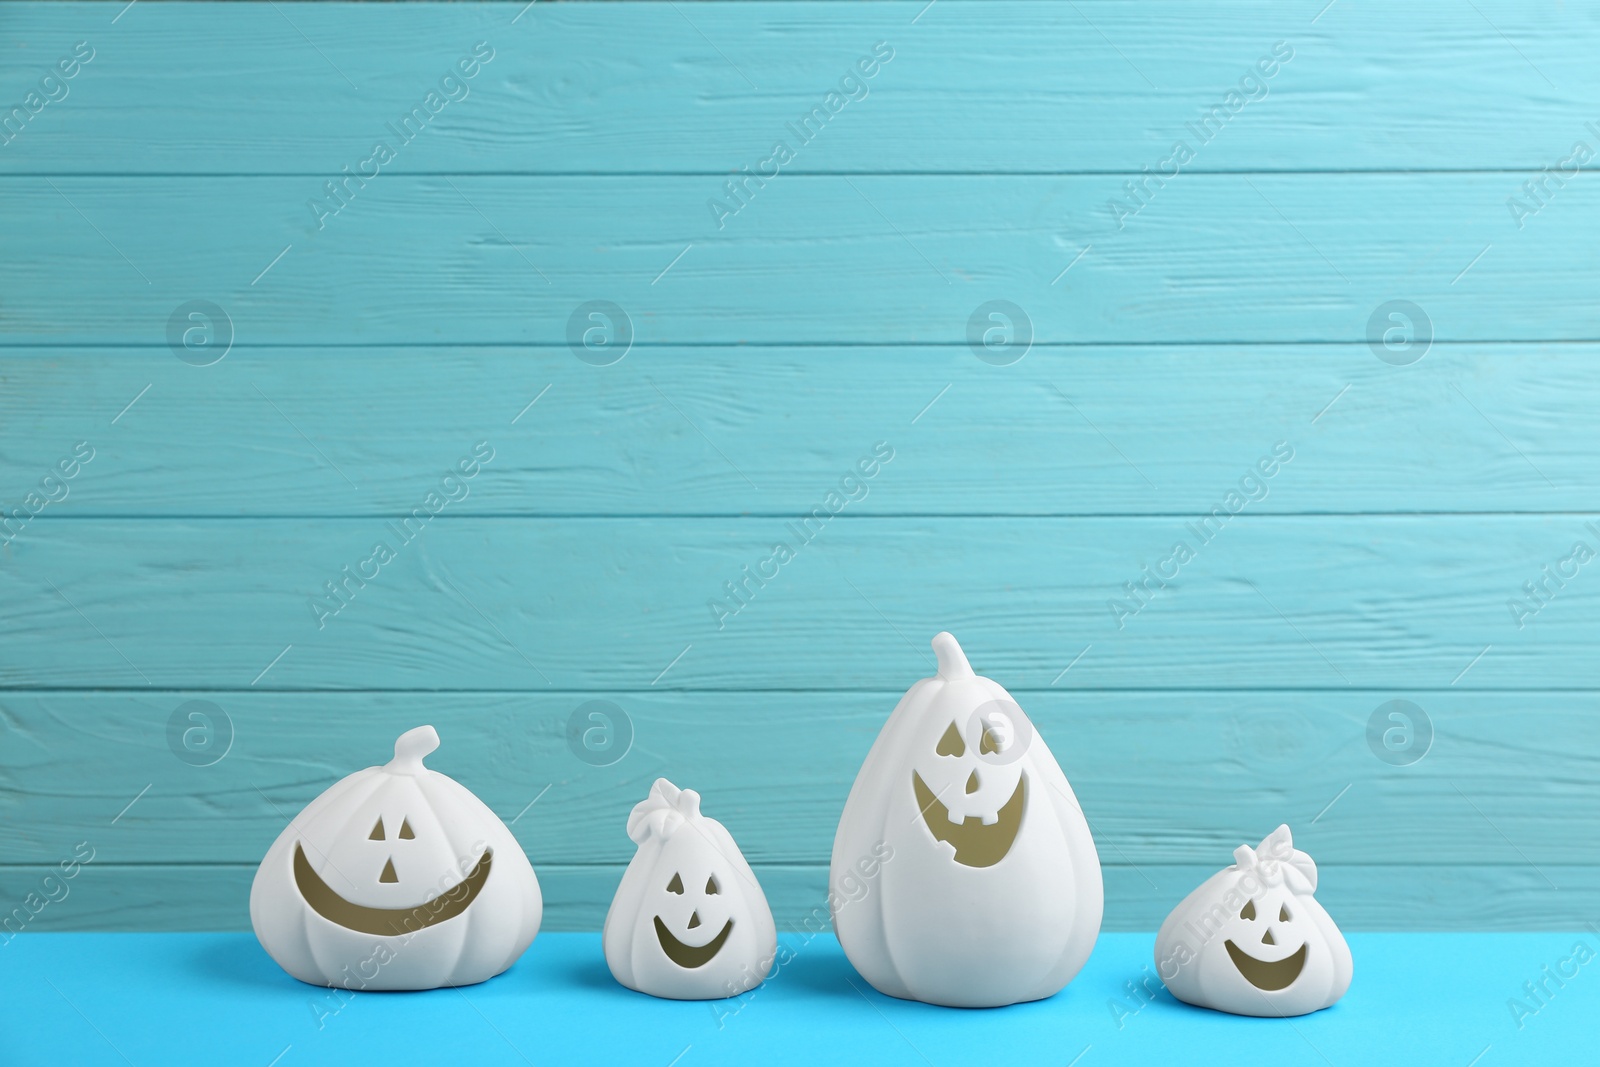 Photo of Jack-o-Lantern candle holders on light blue table against wooden background, space for text. Halloween decor